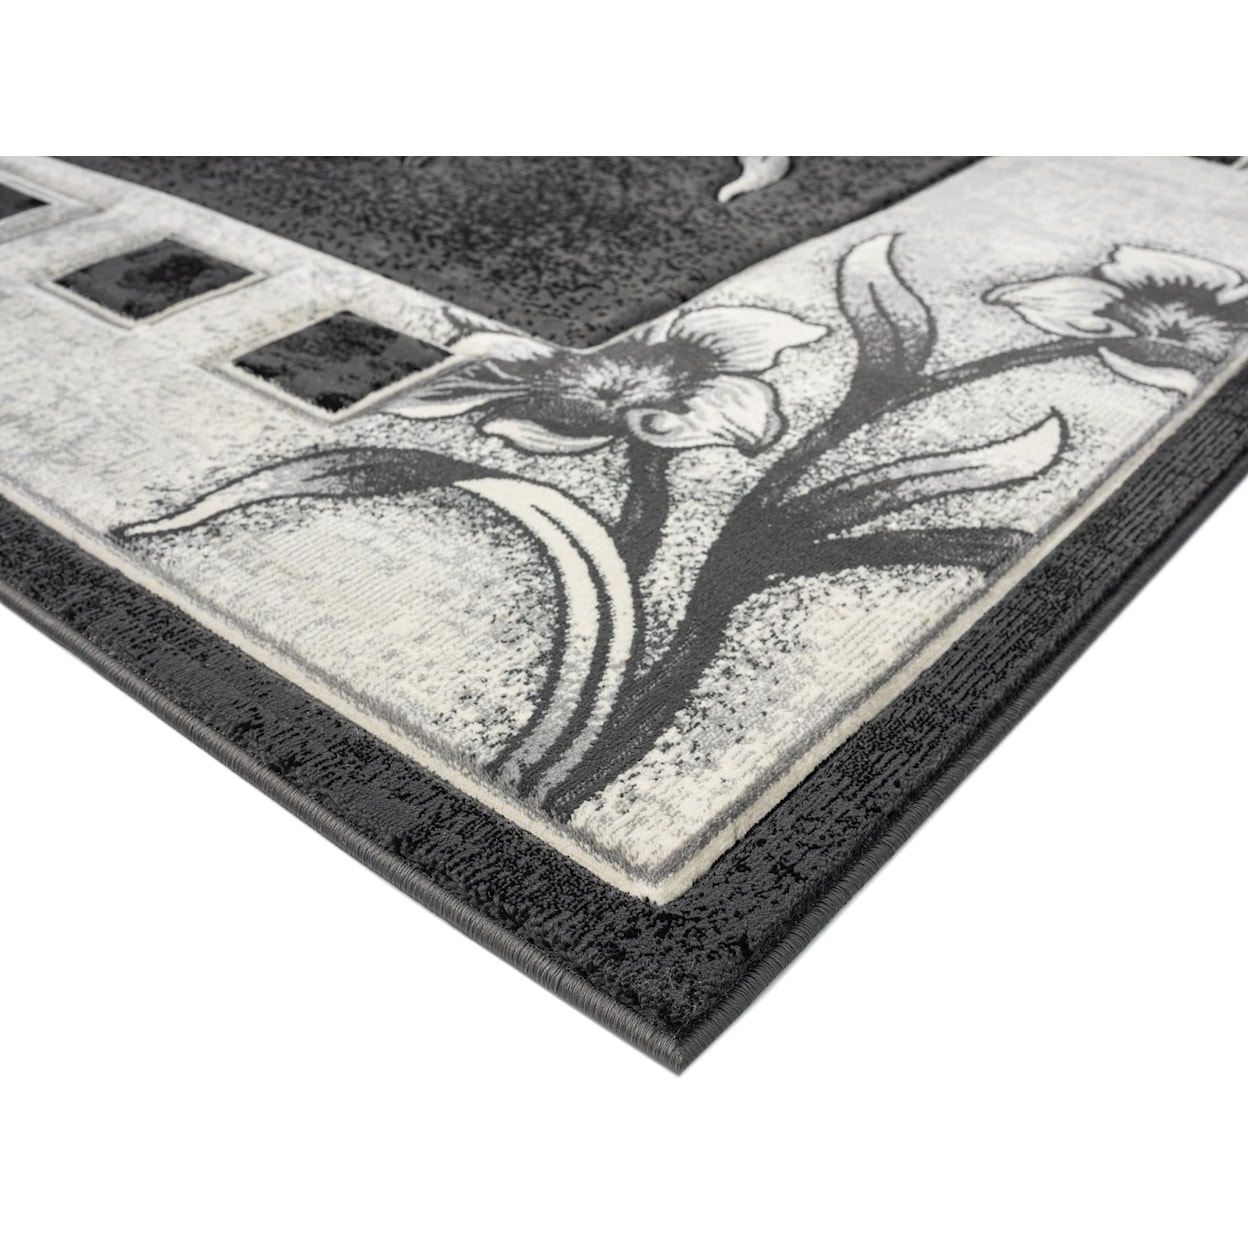 MDA Rugs Rhodes Collection RHODES 8X11 BLACK & WHITE AREA RUG |